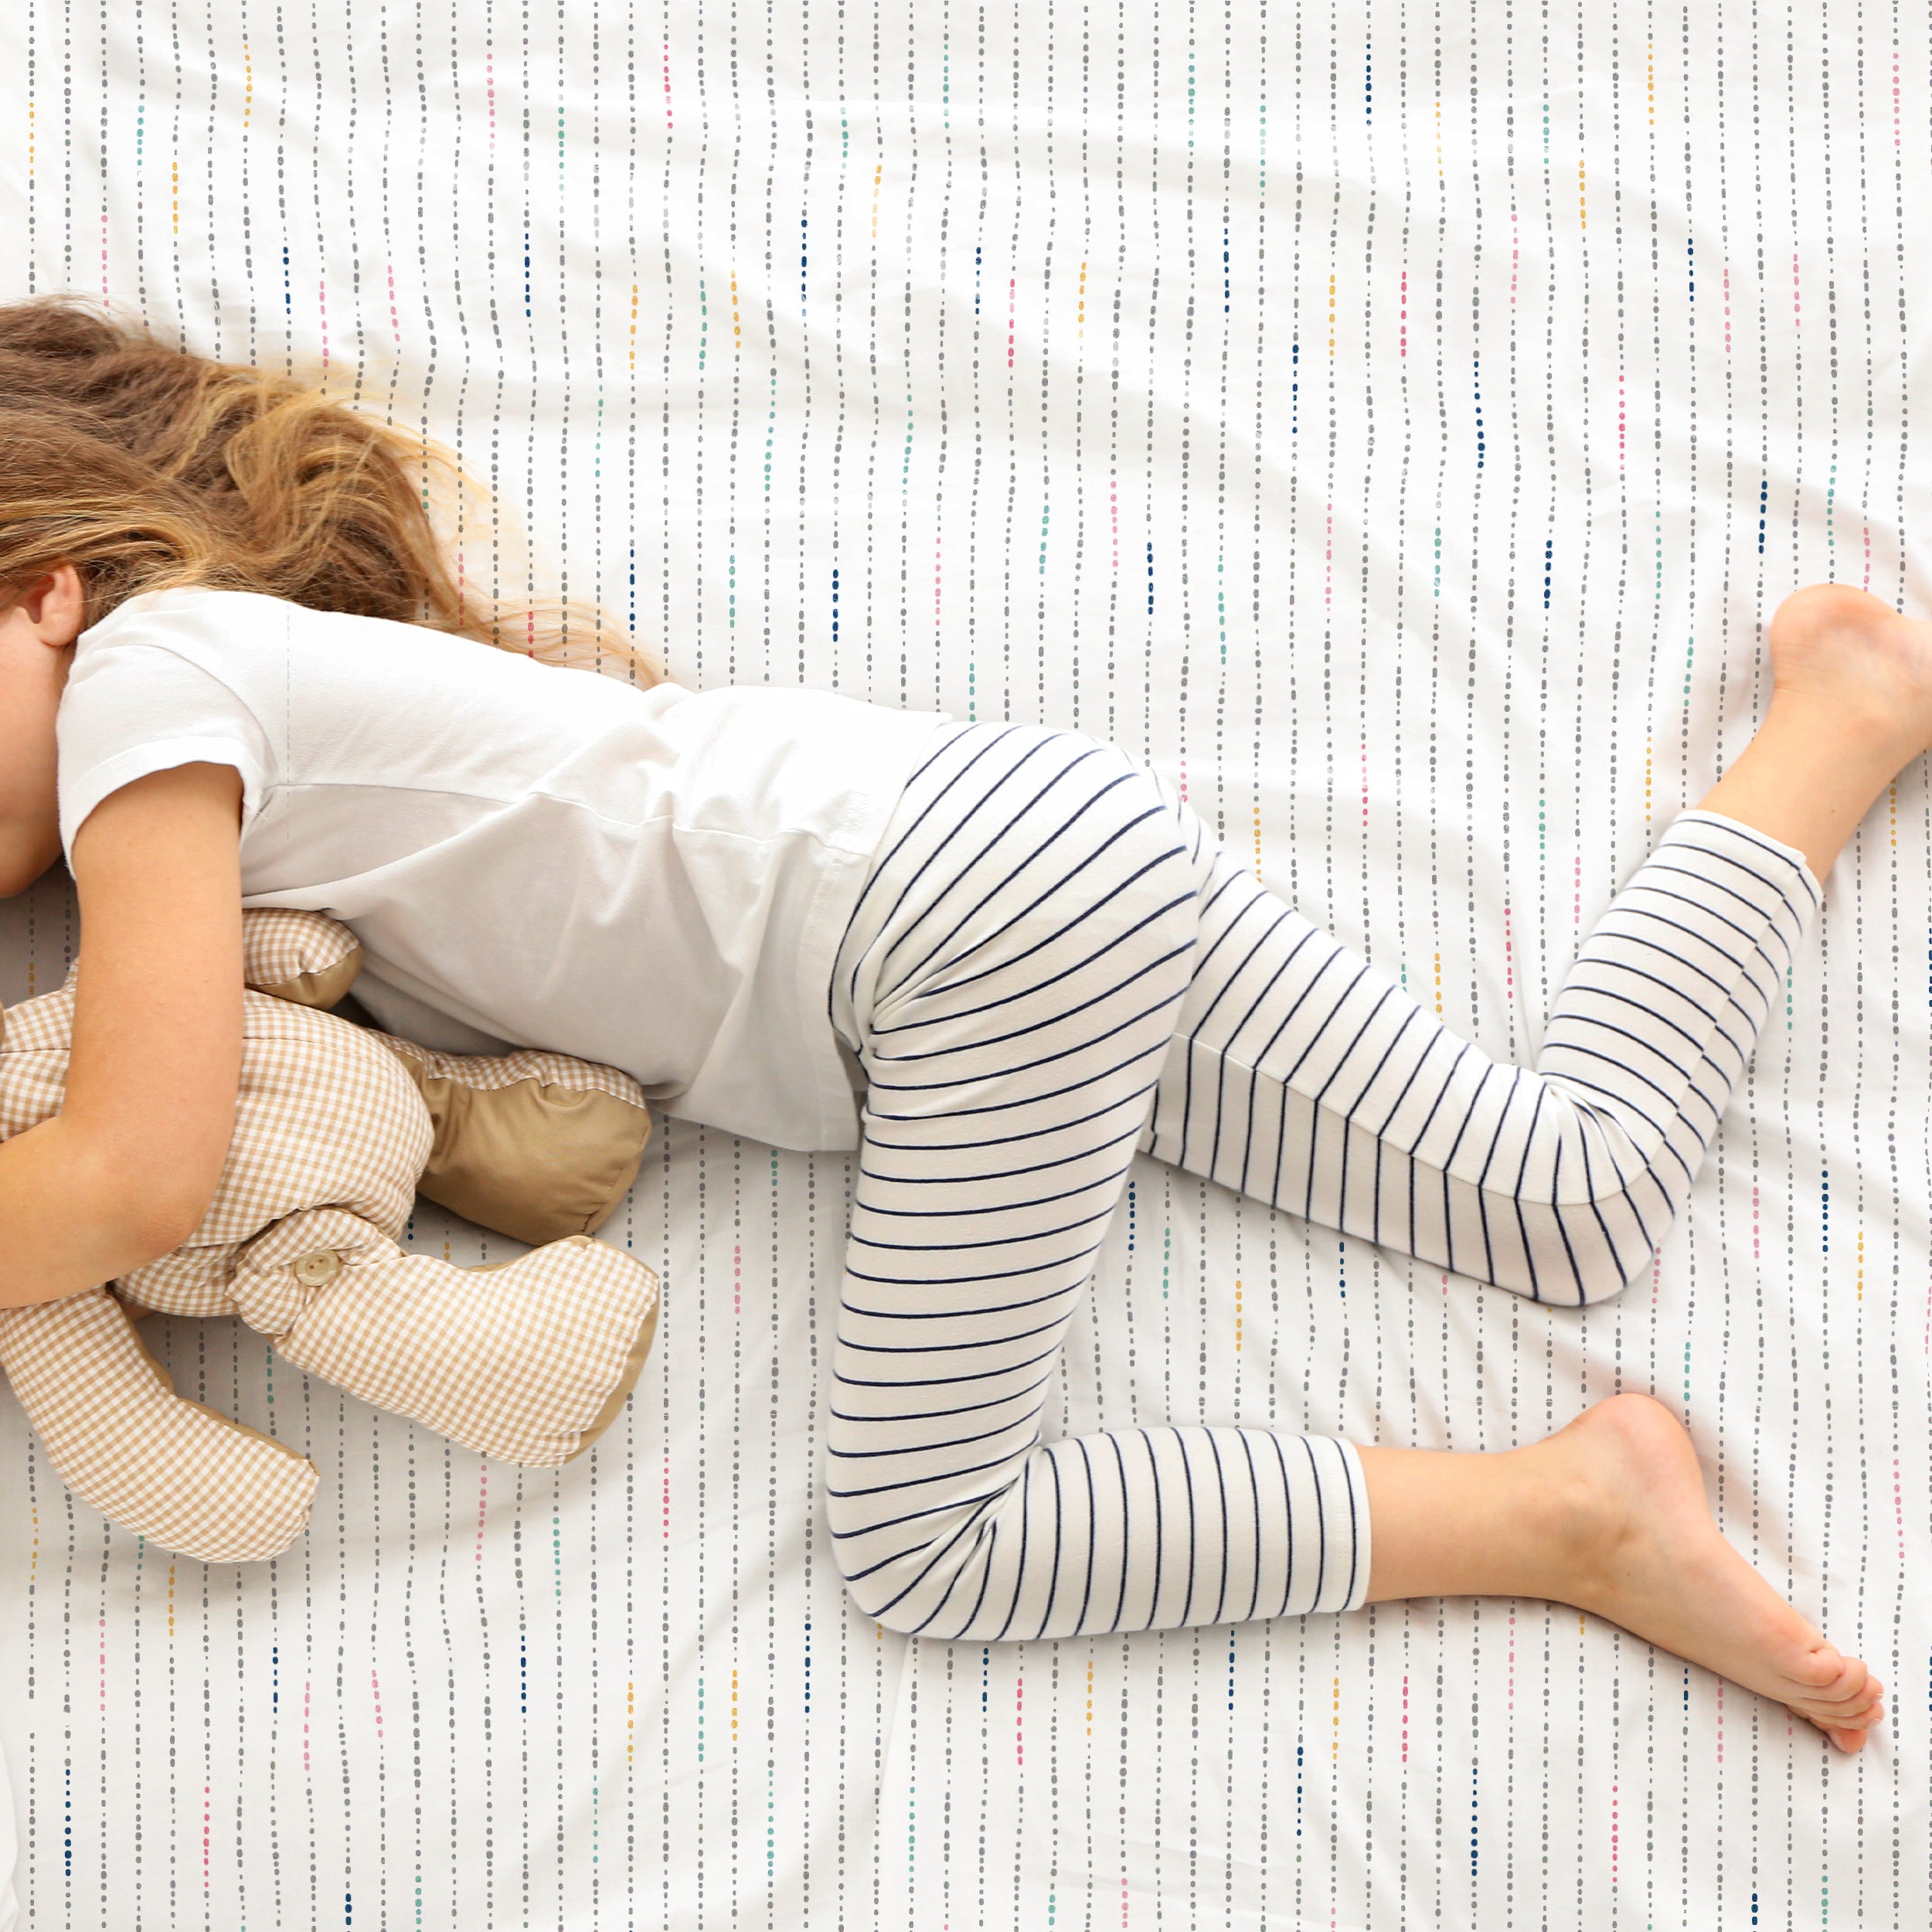 A young child in striped pajamas lying face down on a bed with white and red striped Organic Cotton Sheet Set - Pebble Pop sheets, hugging a teddy bear.